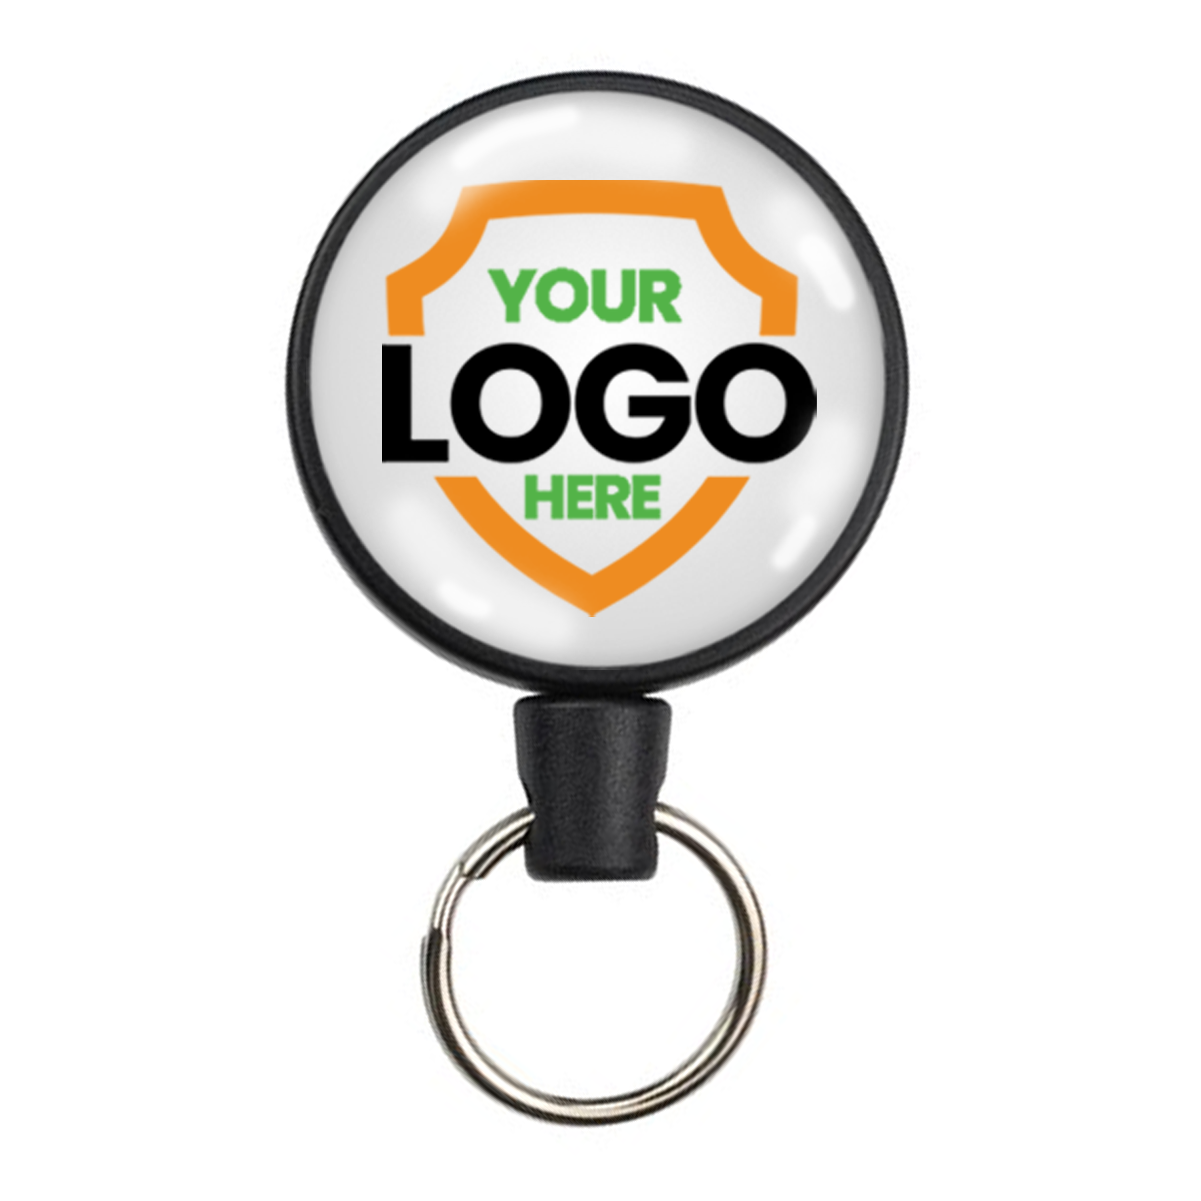 Customizable Key-Bak Mid Size Key Ring Badge Reel with Belt Clip (#6) Add your logo for brand awareness